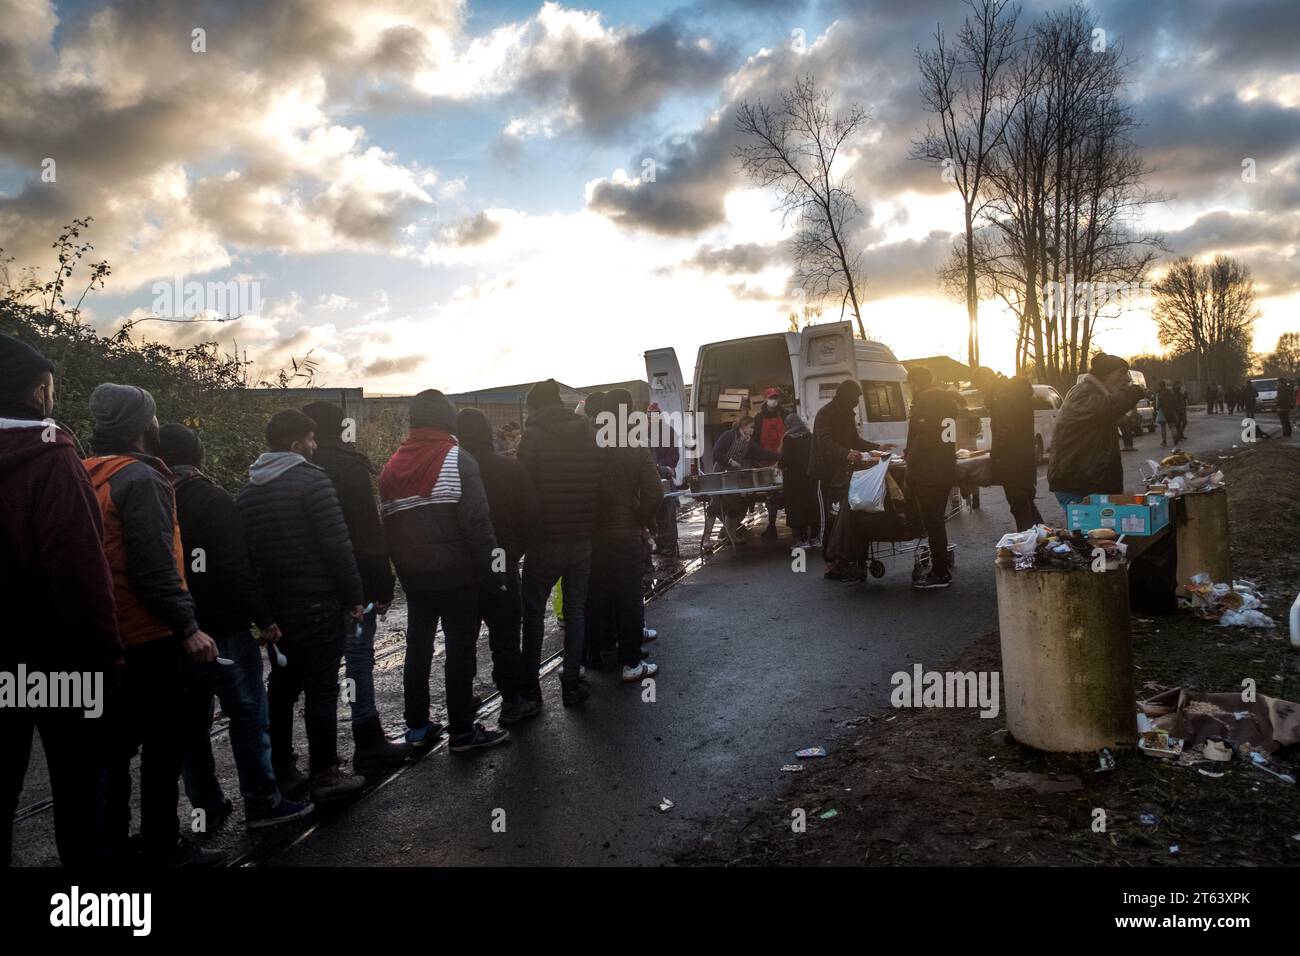 Michael Bunel/Le Pictorium - November 2016, Evacuation of the Calais 'Jungle - 29/11/2021 - France/Haut de France/? Loon Plage ? - Distribution of food by the Refugee community kitchen association. Following the evacuation of the Grande Synthe camp on November 16, a new camp, mainly made up of Kurdish exiles, has been set up near Grande Synthe. November 29, 2021. Loon Plage. France. November 2016, the 'jungle' of Calais, the largest shantytown in Europe, was evacuated. Five years later, the exiles on the road to Great Britain are still there and camps are regularly created betw Stock Photo